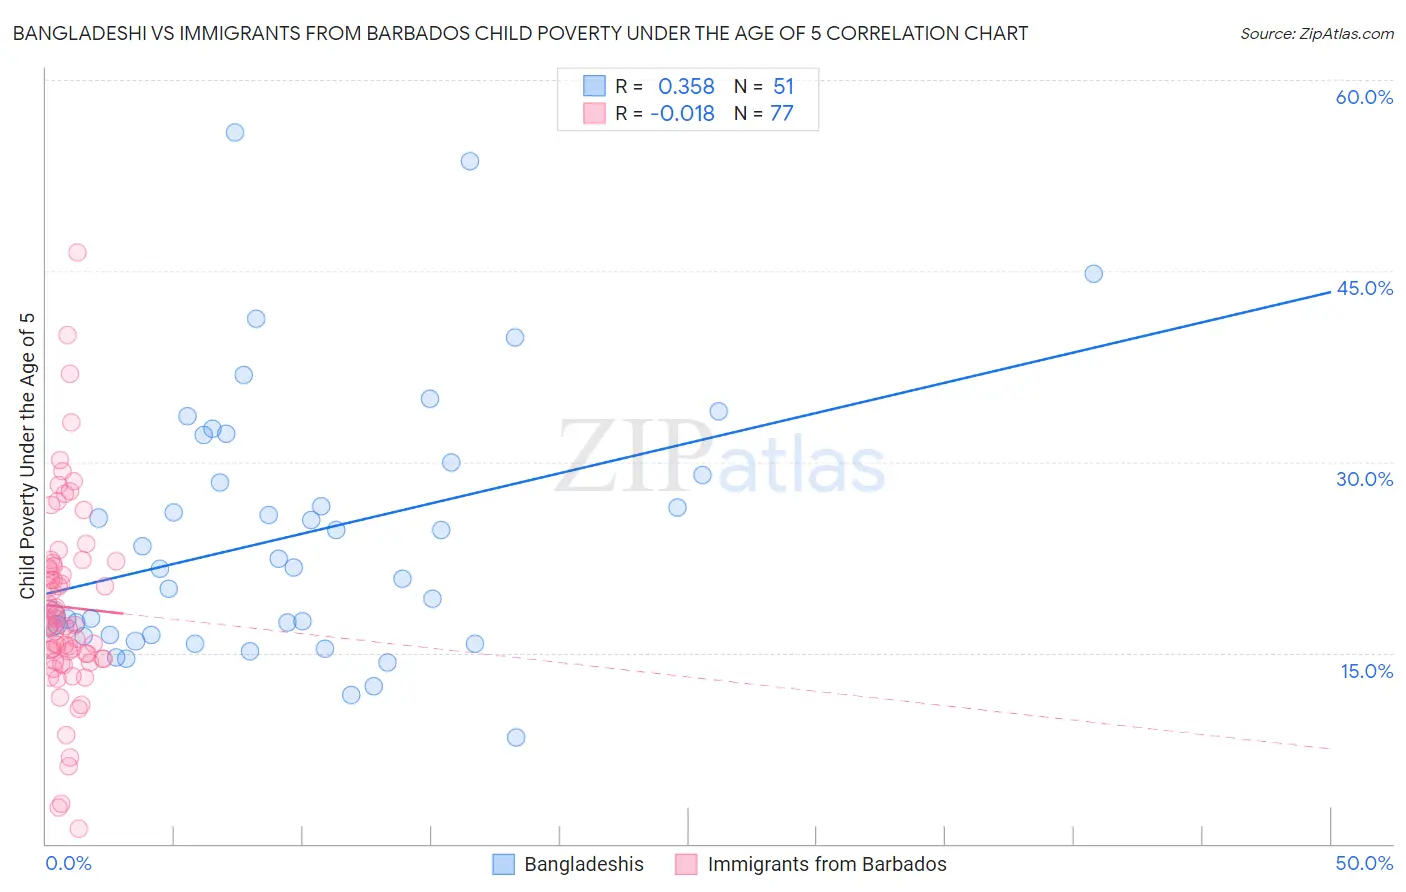 Bangladeshi vs Immigrants from Barbados Child Poverty Under the Age of 5